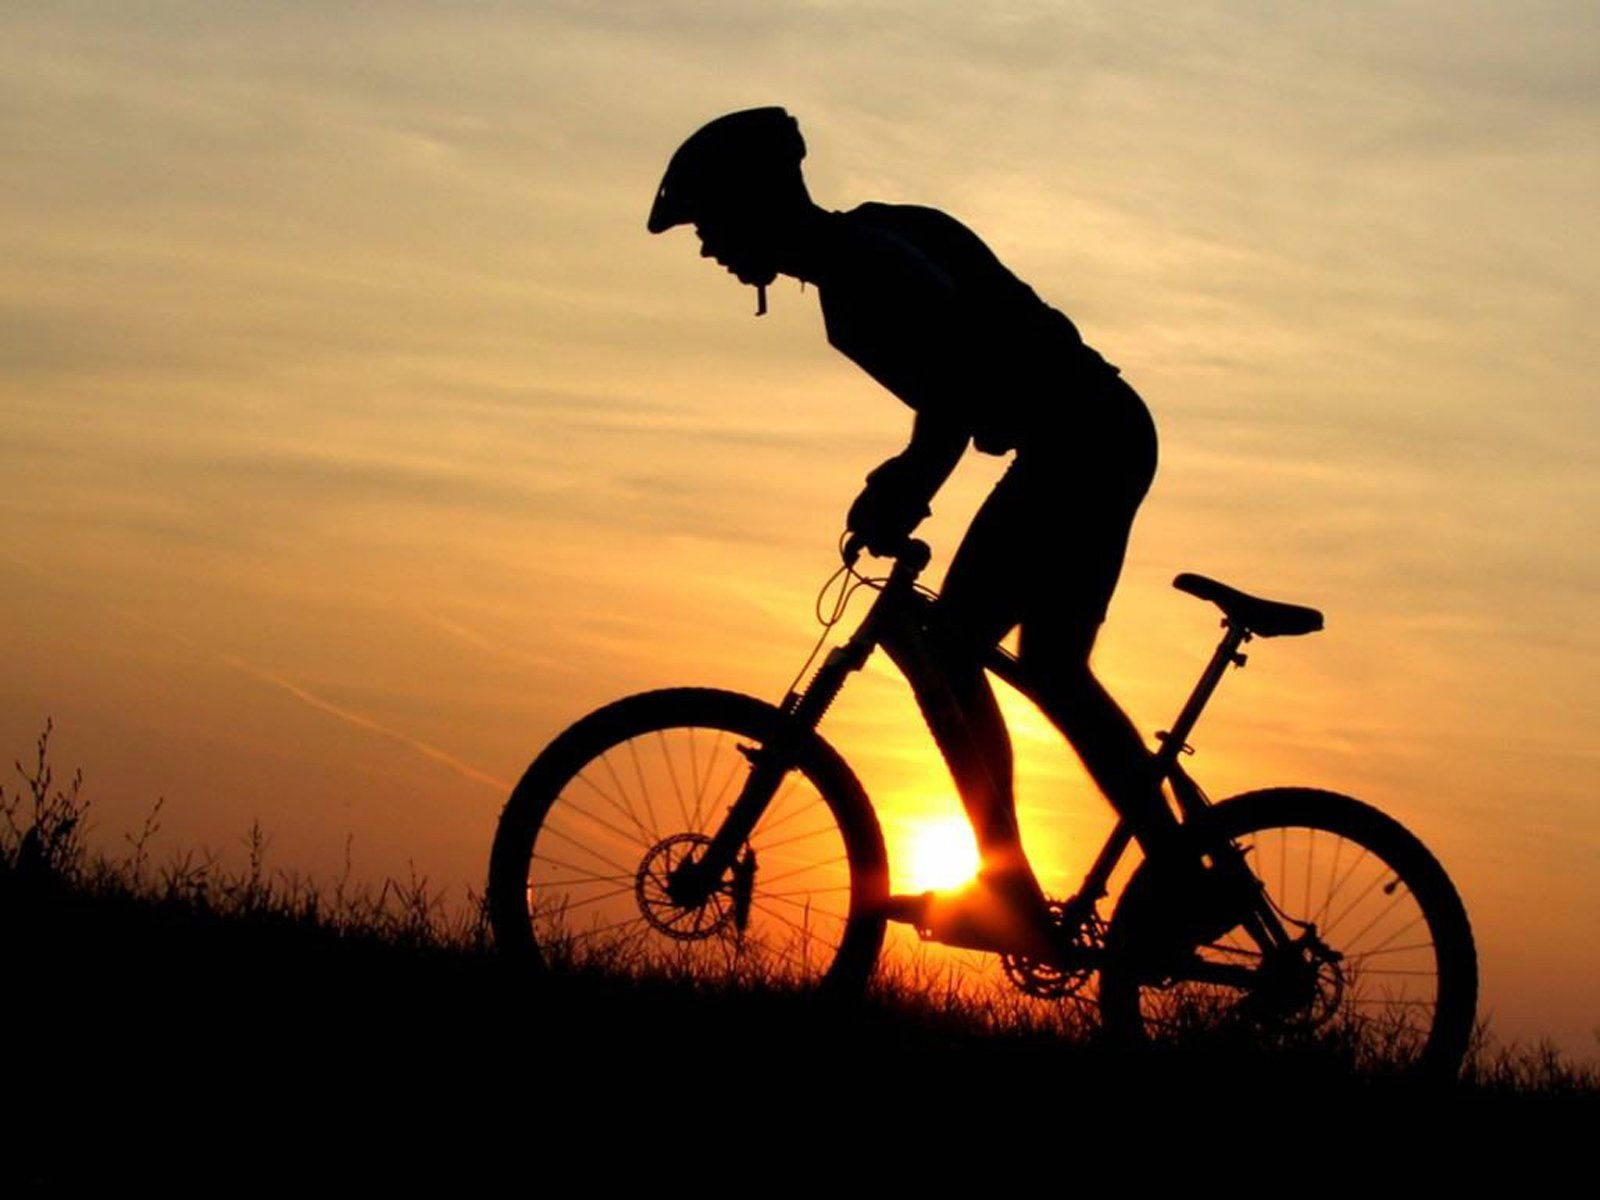 Cyclist On Bike Silhouette At Sunset